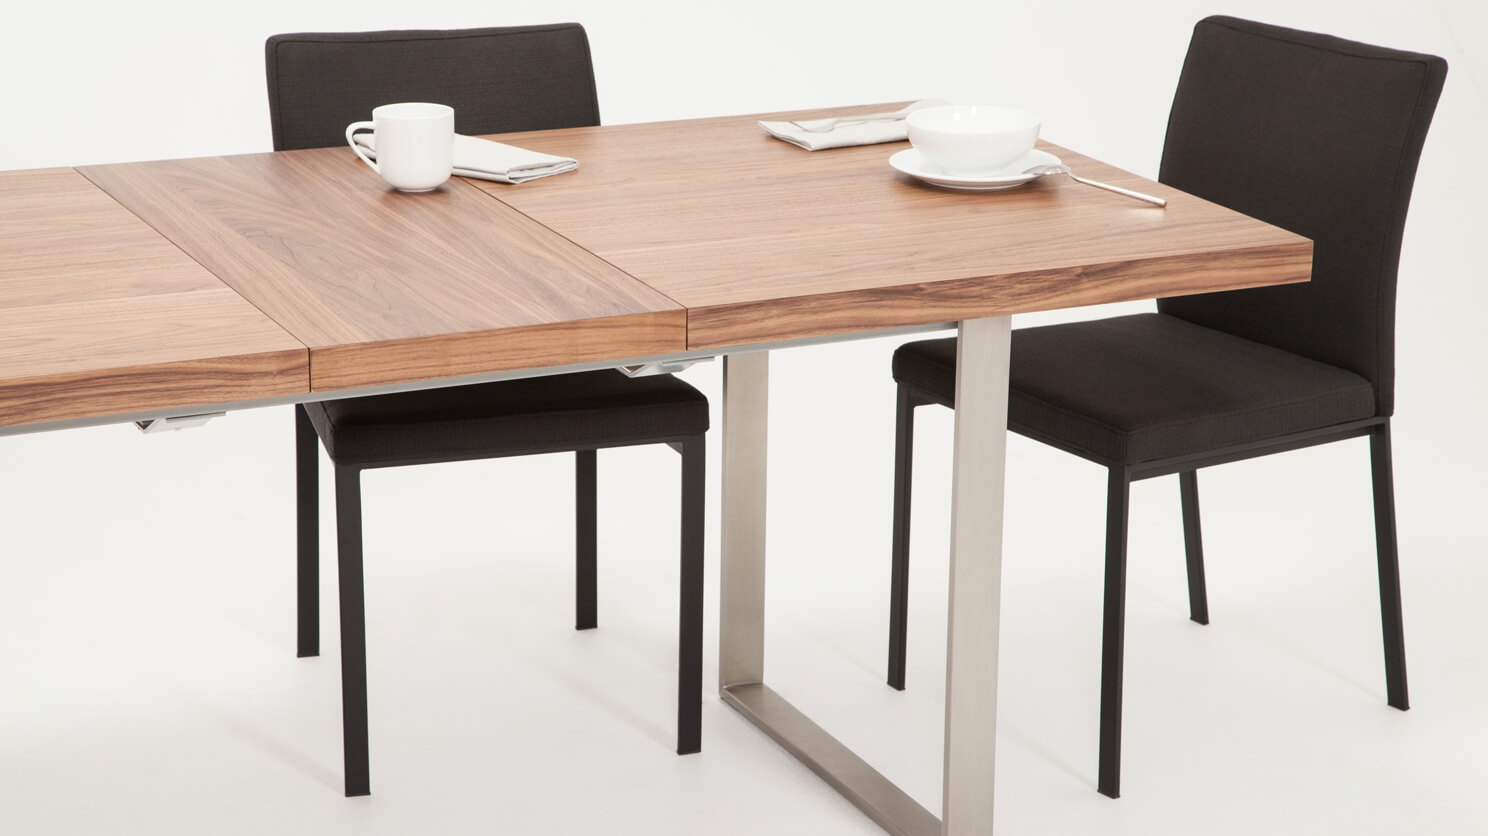 Hatch Dining Table pertaining to size 1488 X 836